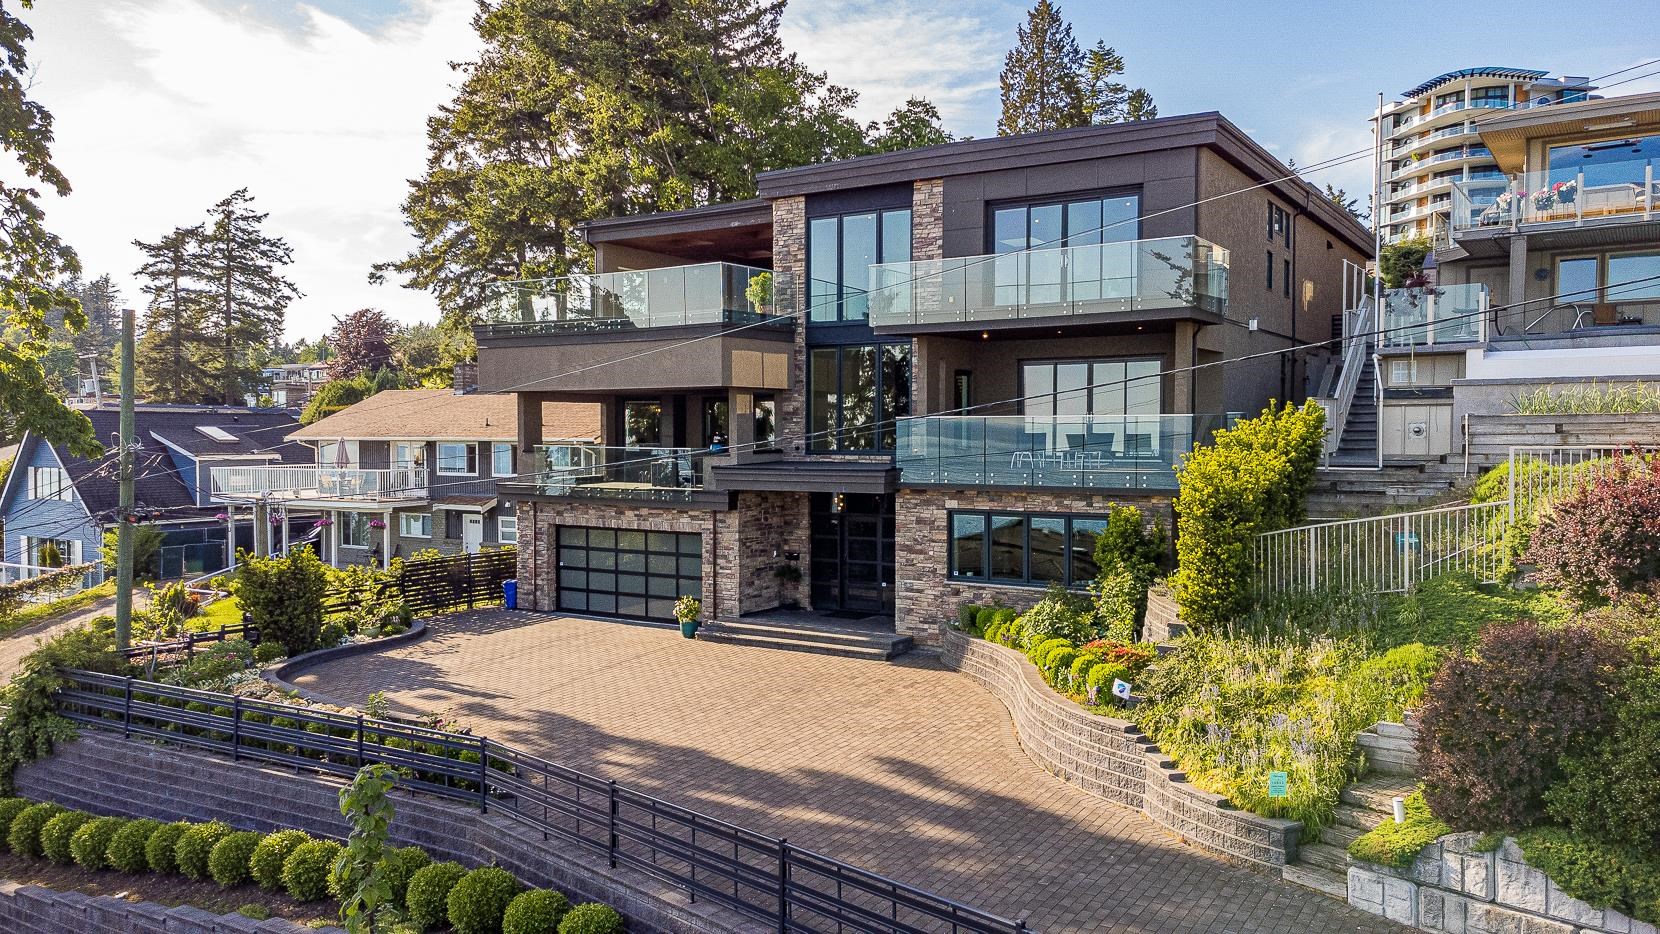 Meet the Pinnacle at White Rock, the home that nurtures and inspires